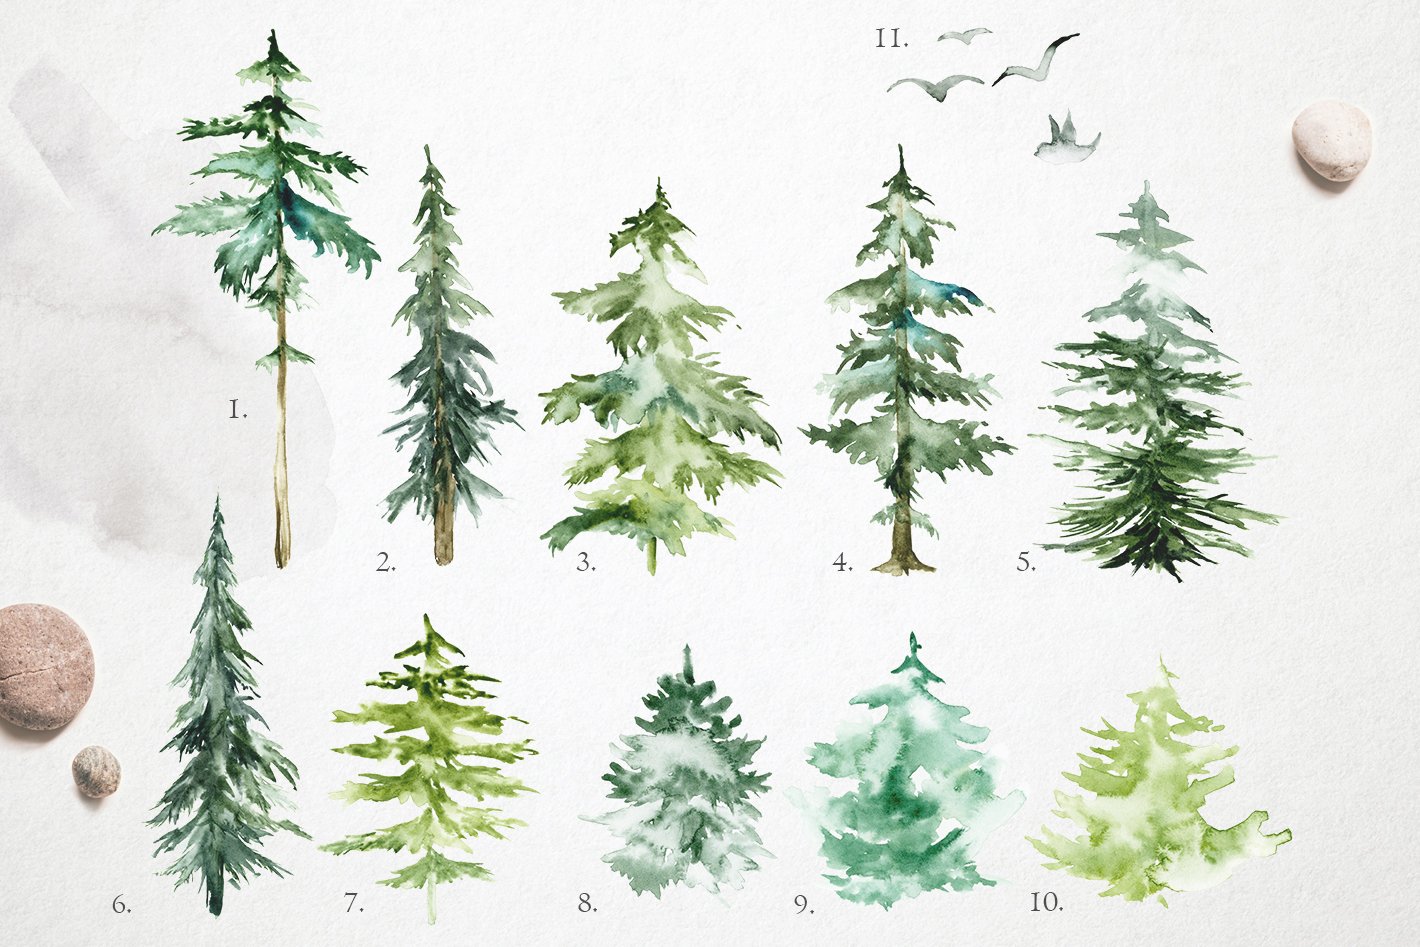 Bunch of pine trees painted with watercolors.